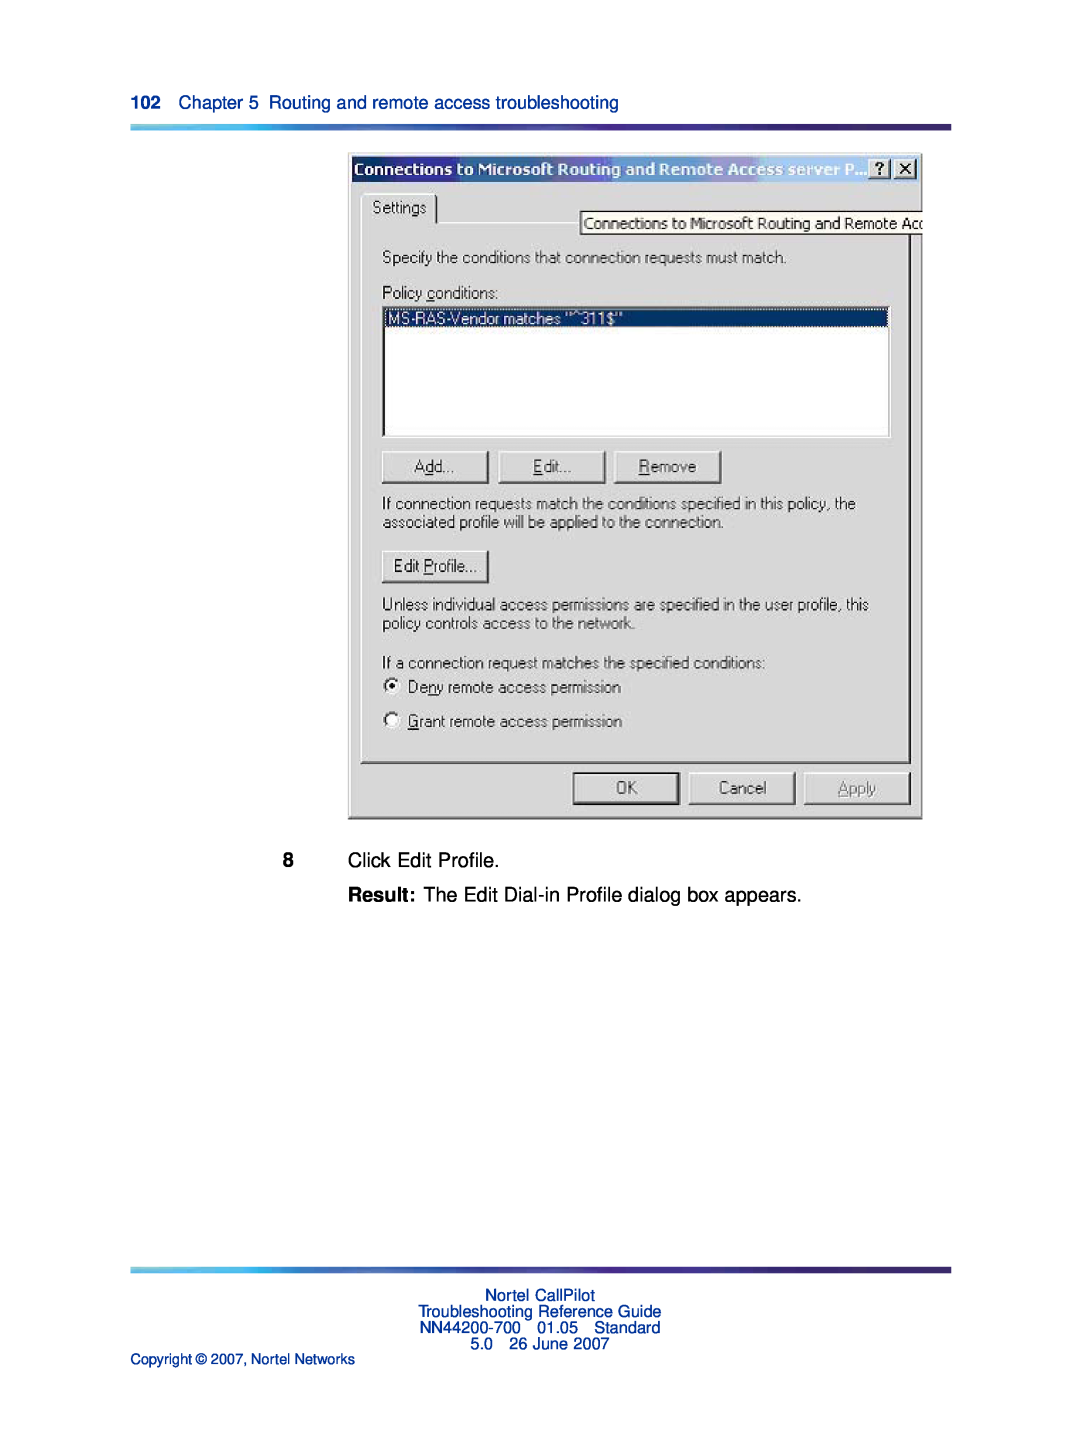 Nortel Networks NN44200-700 manual Click Edit Proﬁle Result The Edit Dial-in Proﬁle dialog box appears 